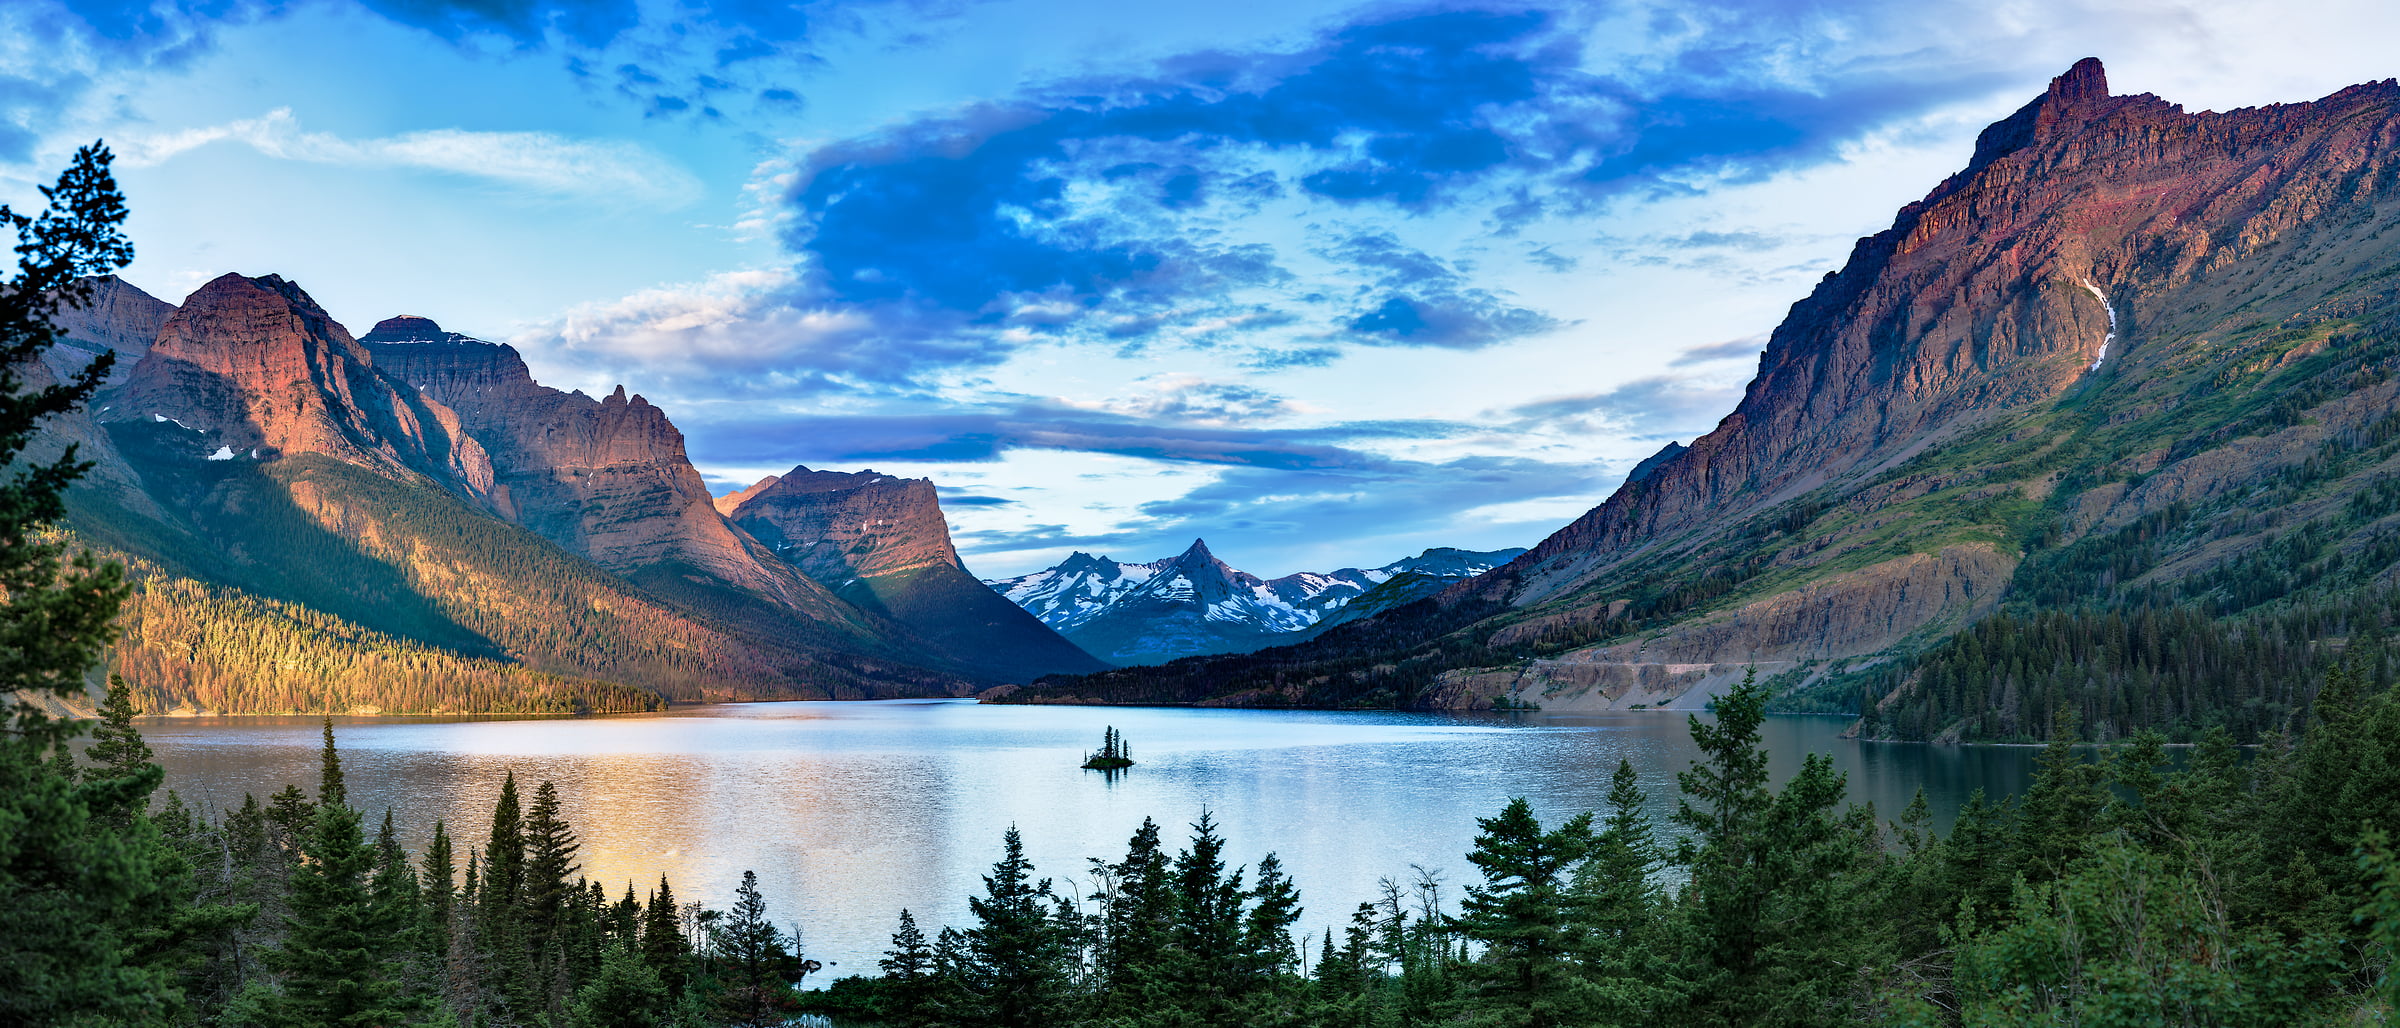 789 megapixels! A very high resolution, large-format VAST photo print of St. Mary Lake in Glacier National Park; landscape photograph created by John Freeman.